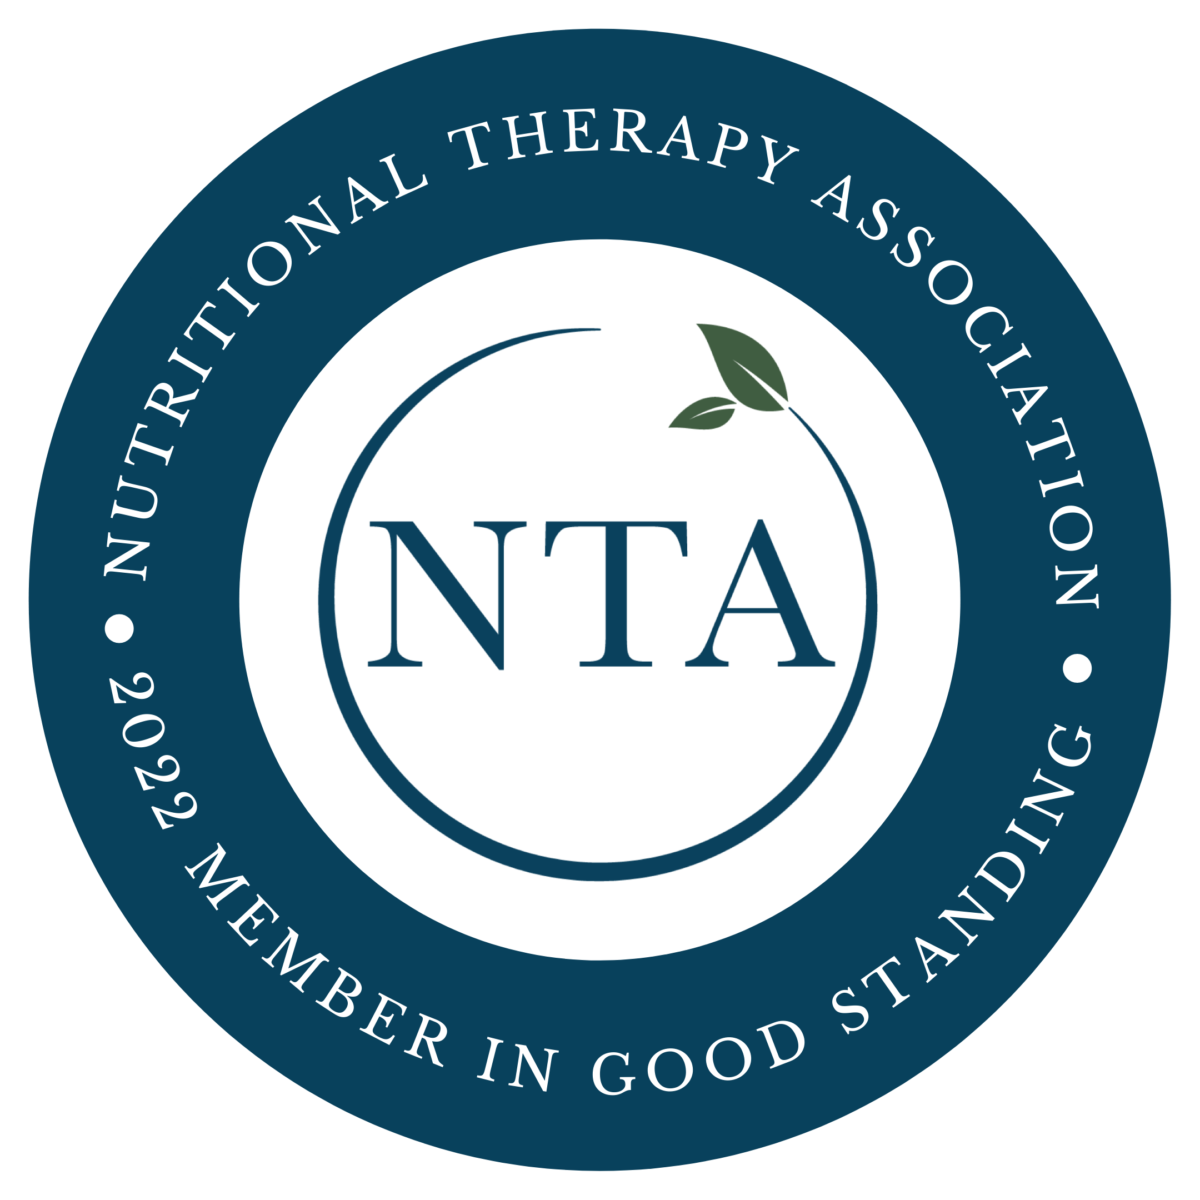 Nutritional Therapy Association 2022 Member in Good Standing Badge